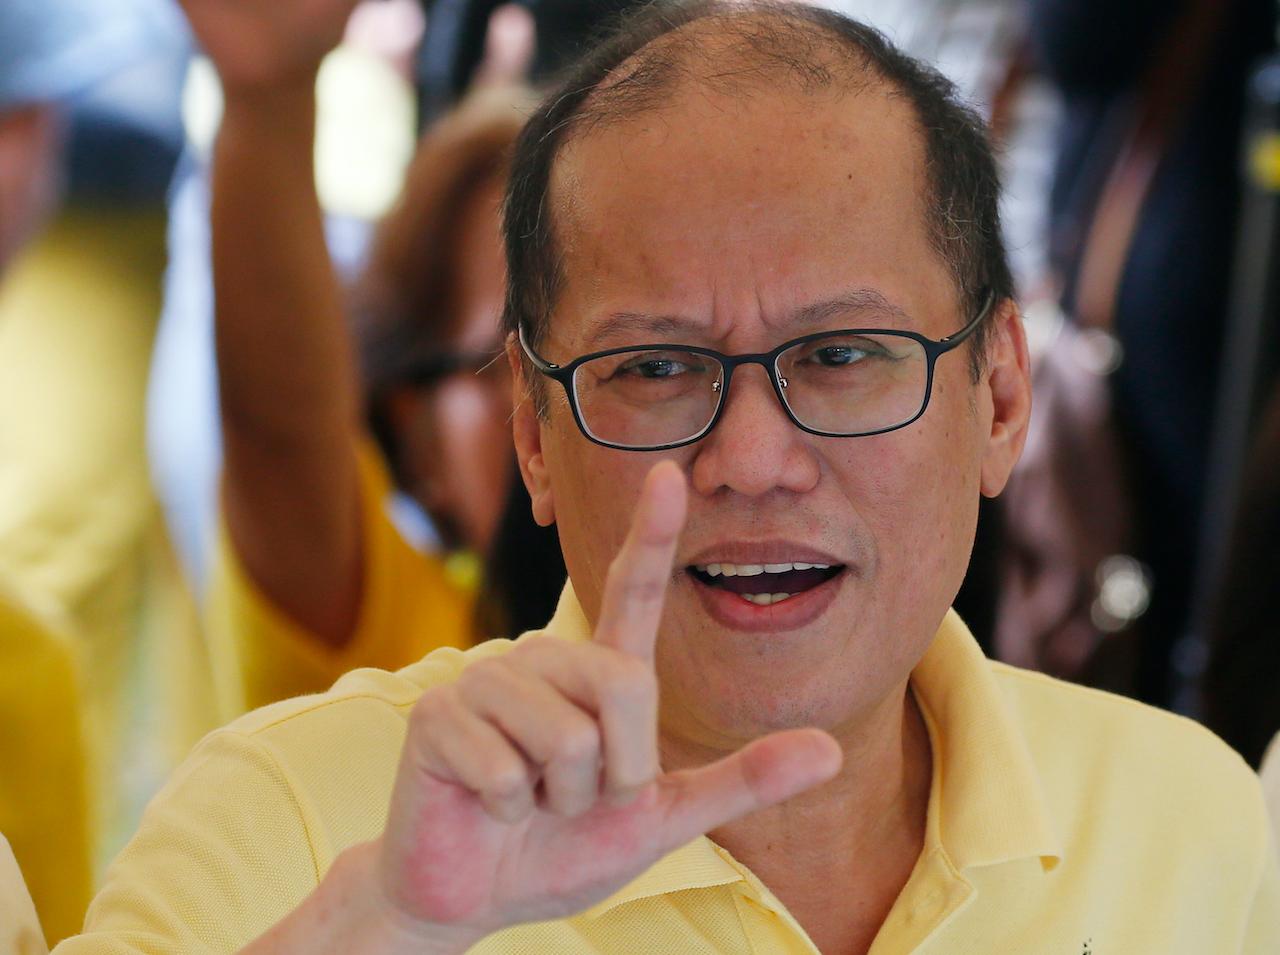 Former Philippines president Benigno Aquino flashes the 'L' sign meaning 'Fight!' At an event commemorating the assassination of his father, Benigno Aquino Jr, on Aug 21, 2018. Photo: AP